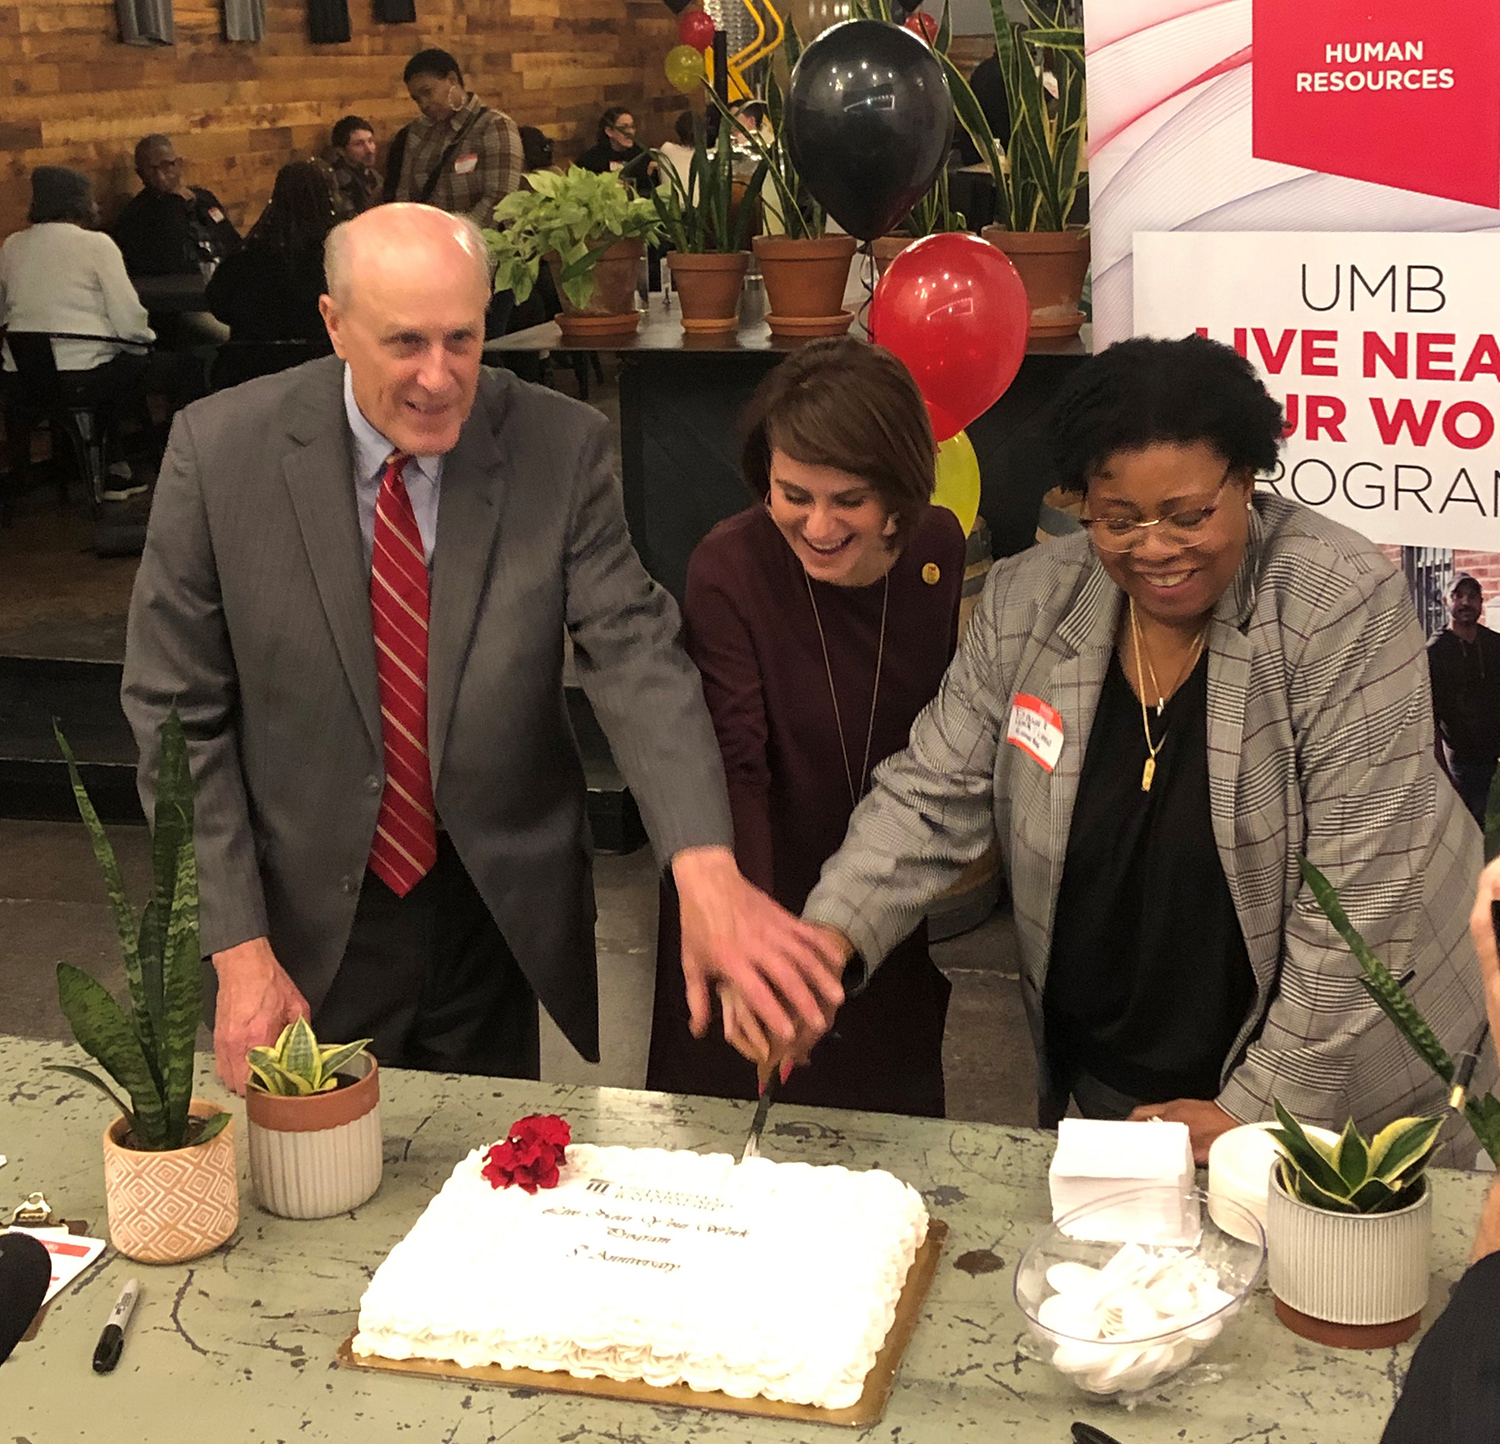 Annie Milli (center), executive director of Live Baltimore, joins UMB President Bruce Jarrell and Dawn Rhodes, senior vice president and chief business and finance officer, to cut the cake.